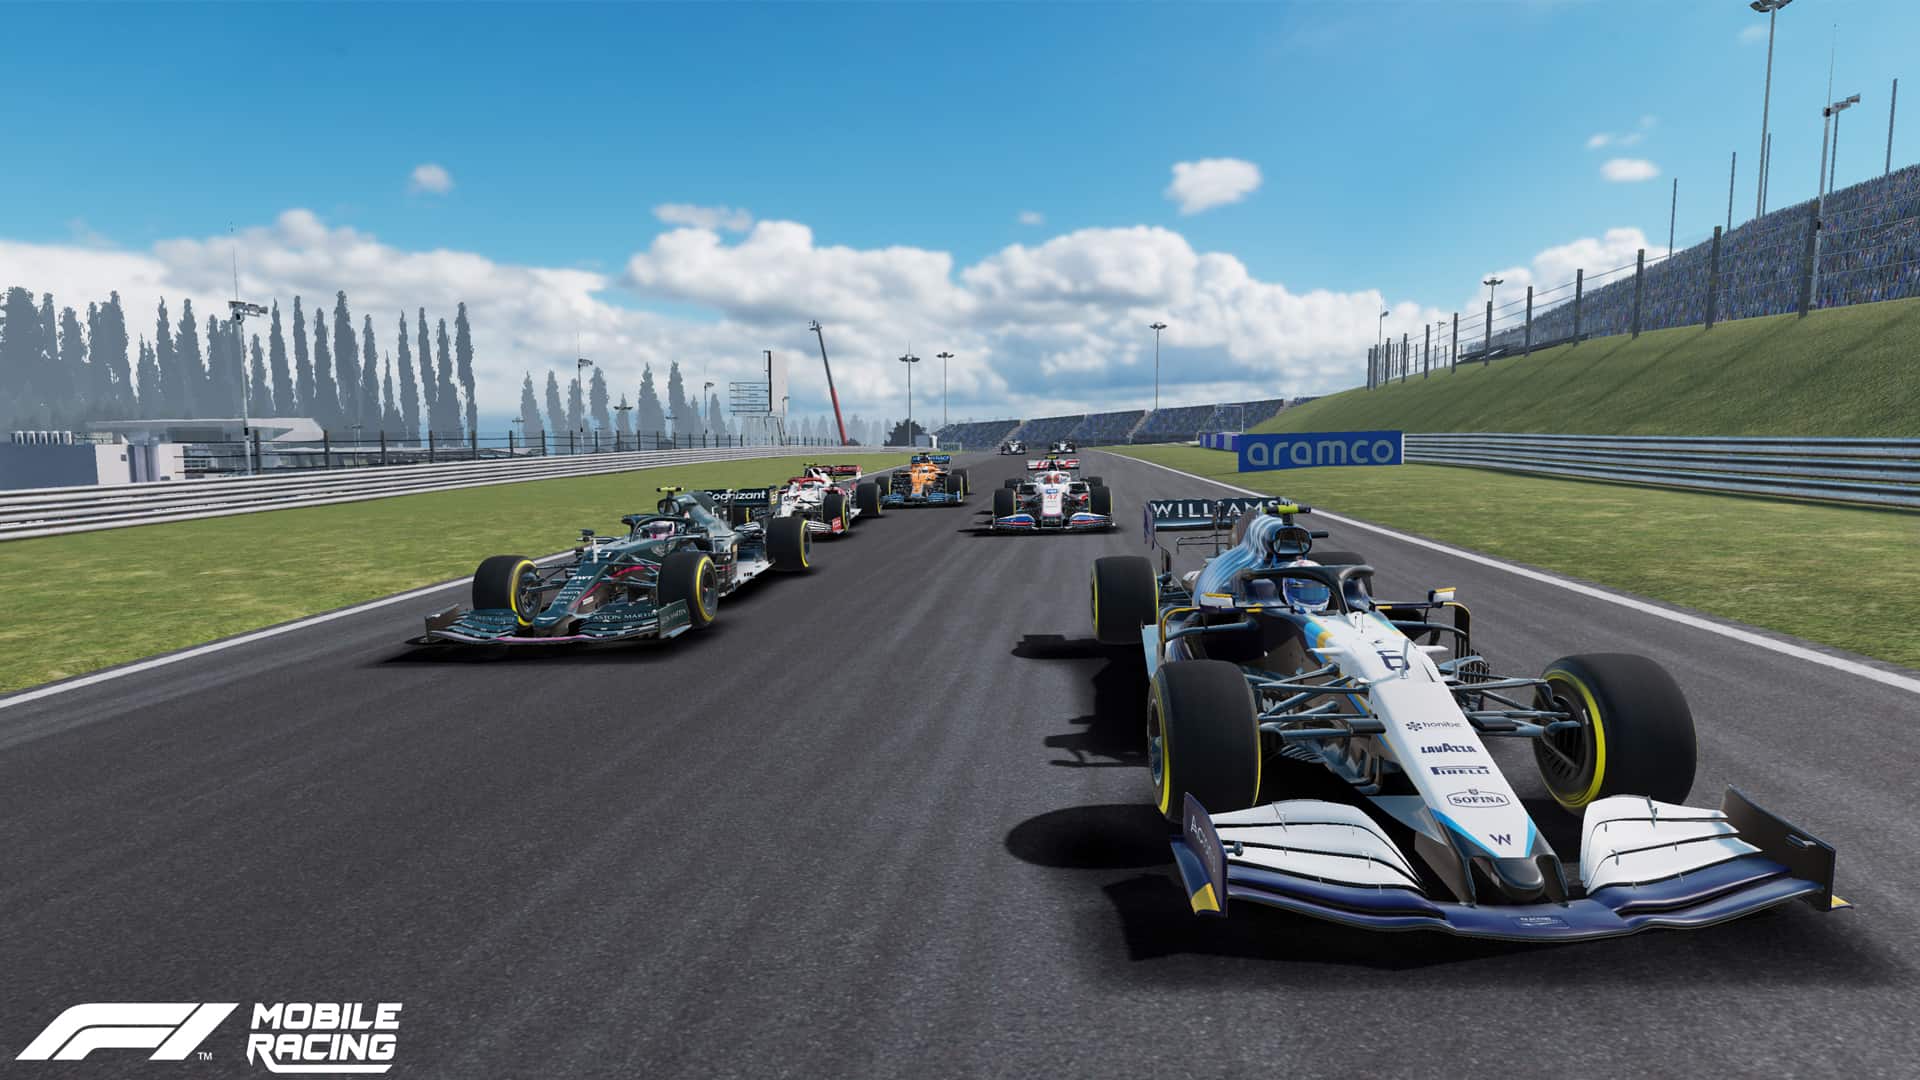 F1 Mobile Racing's Update 21 allows you to look behind